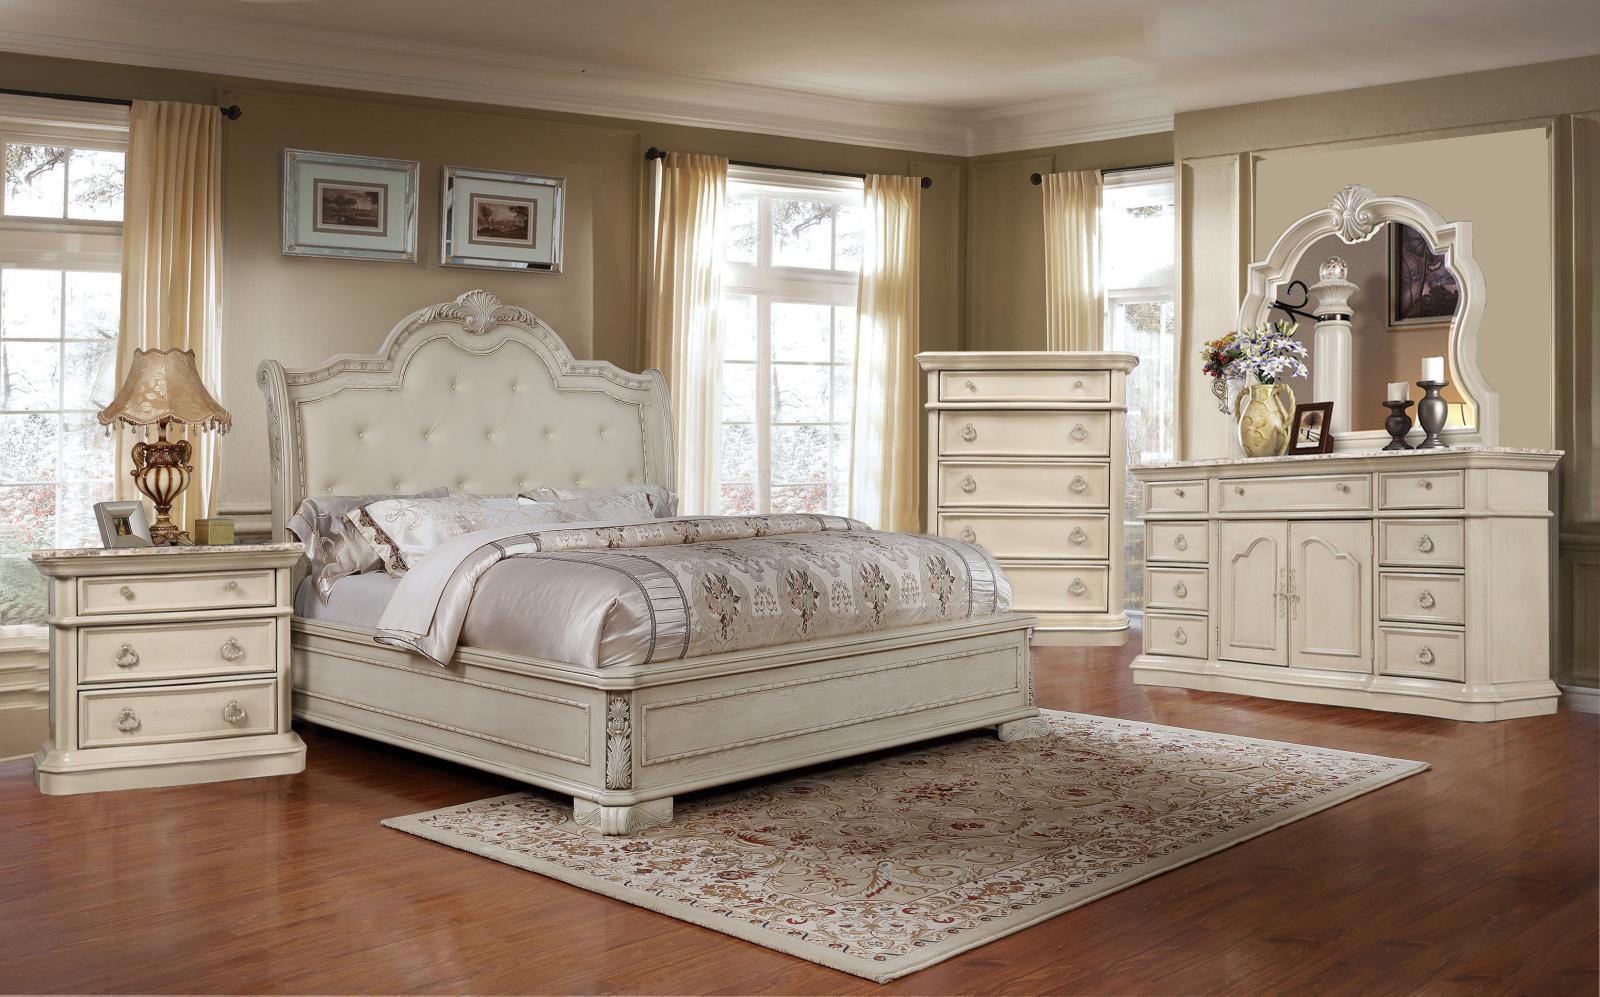 

    
Antique White Tufted Queen Size Bedroom Set 4Pcs Traditional McFerran B1000
